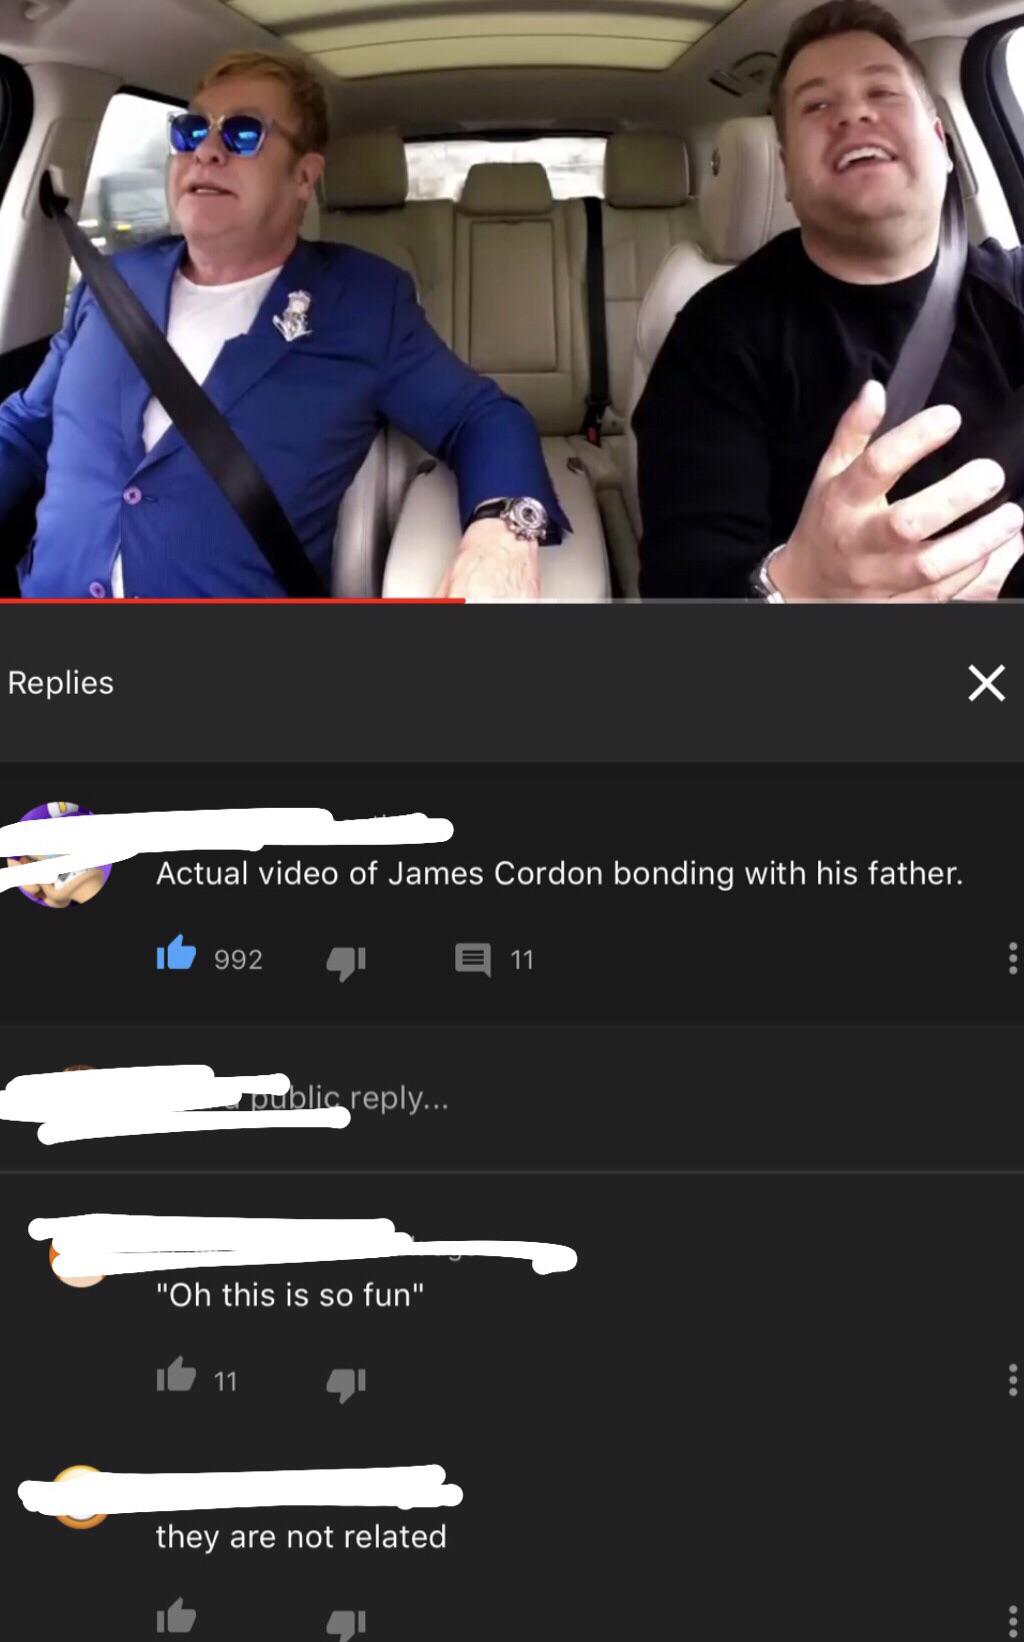 screenshot - Replies Actual video of James Cordon bonding with his father. it 992 41 211 public ... "Oh this is so fun" ib 11 1 they are not related